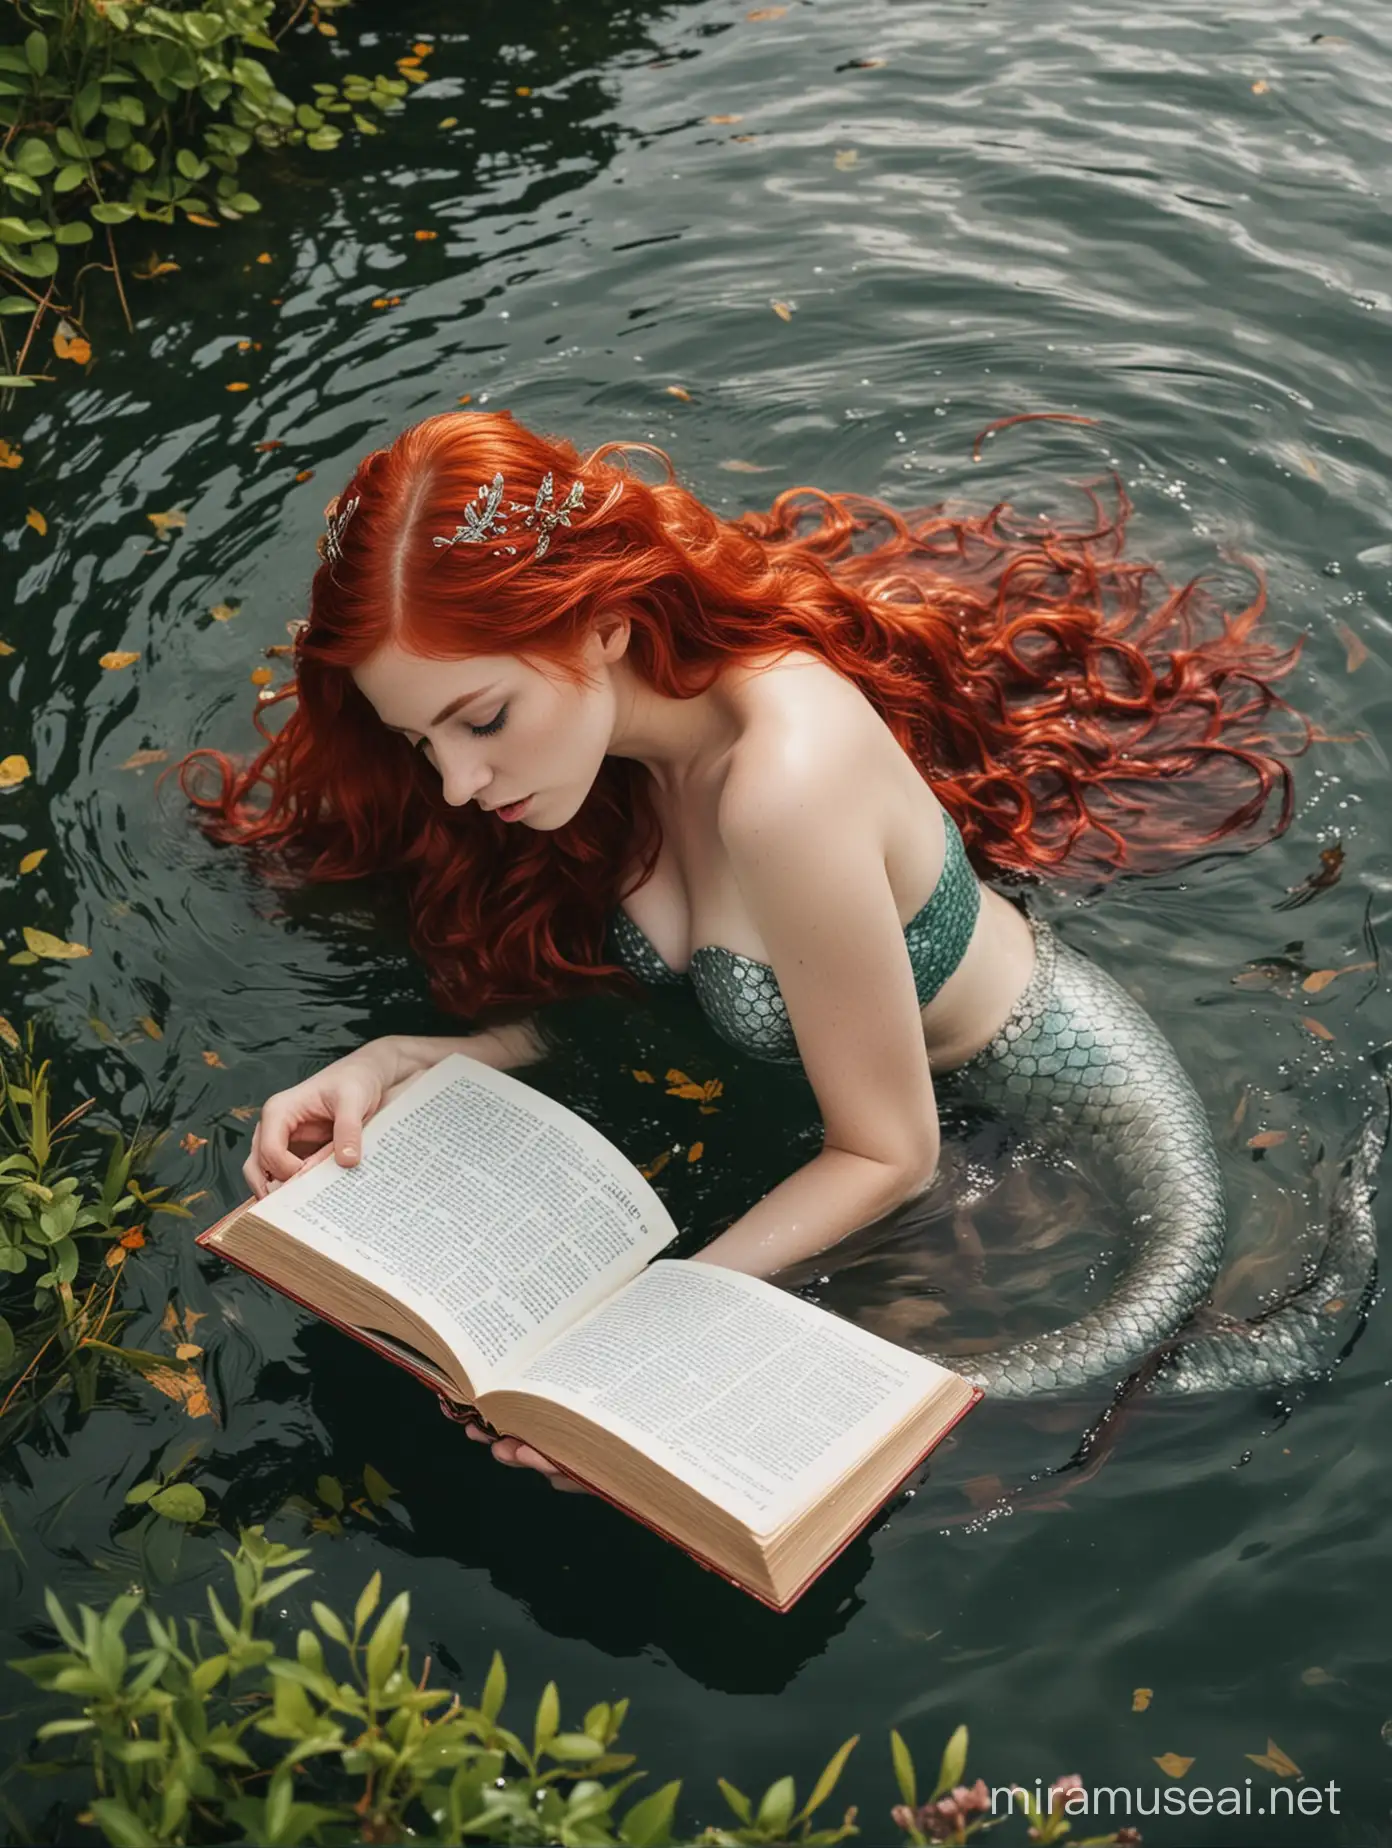 RedHaired Mermaid Writing Poetry in Enchanted Forest